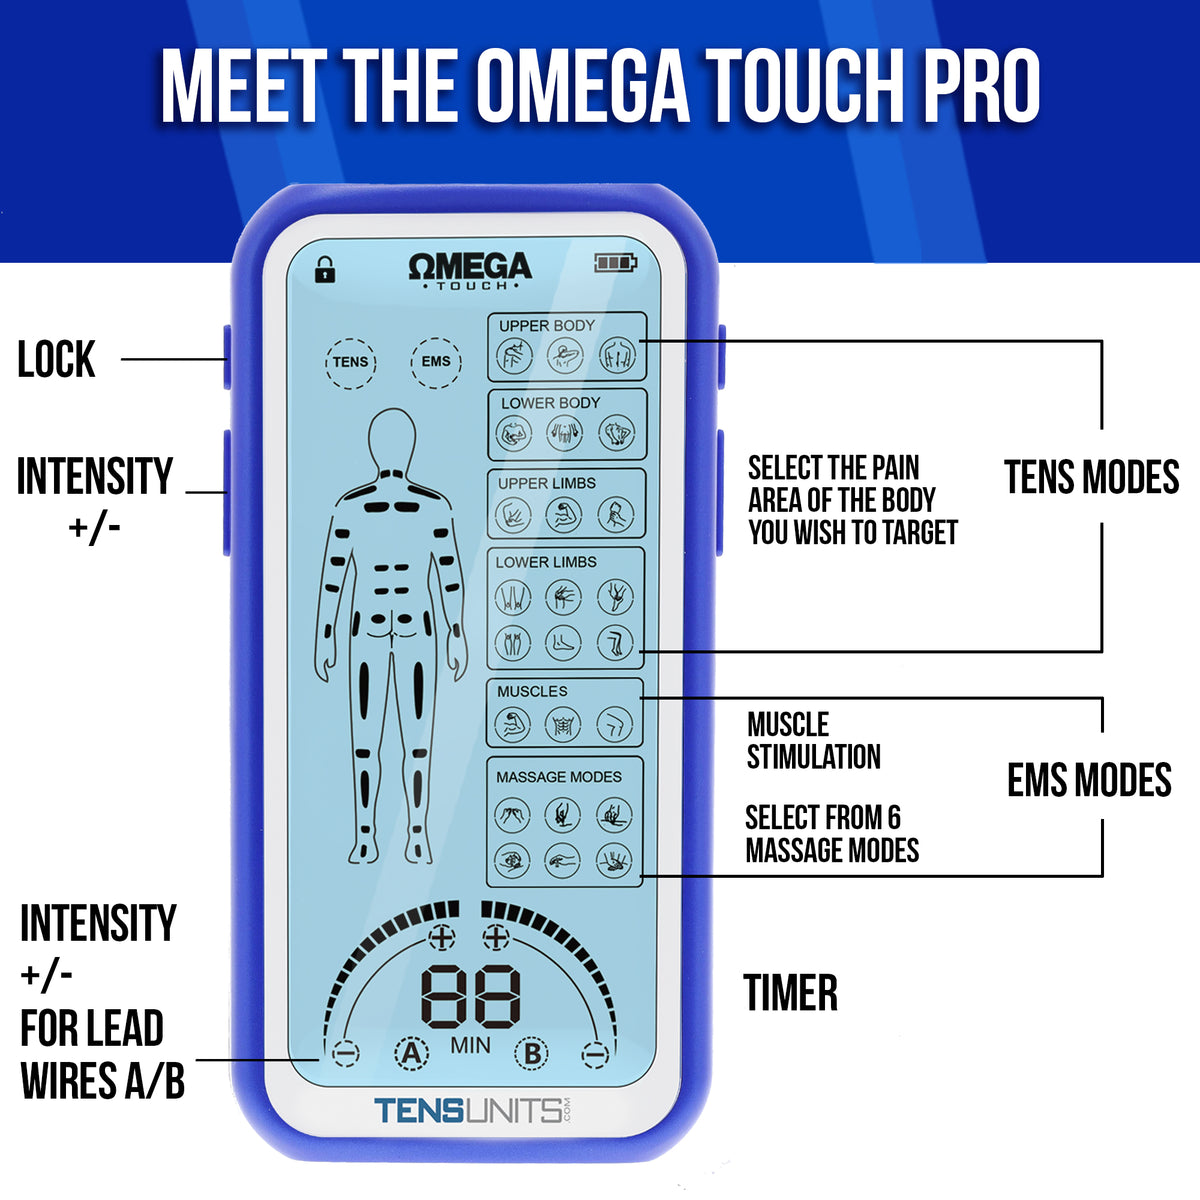 OMEGA Wireless TENS Unit Muscle Stimulator with Remote, 2 Back Pain Relief  Pads, USB Charger Muscle …See more OMEGA Wireless TENS Unit Muscle